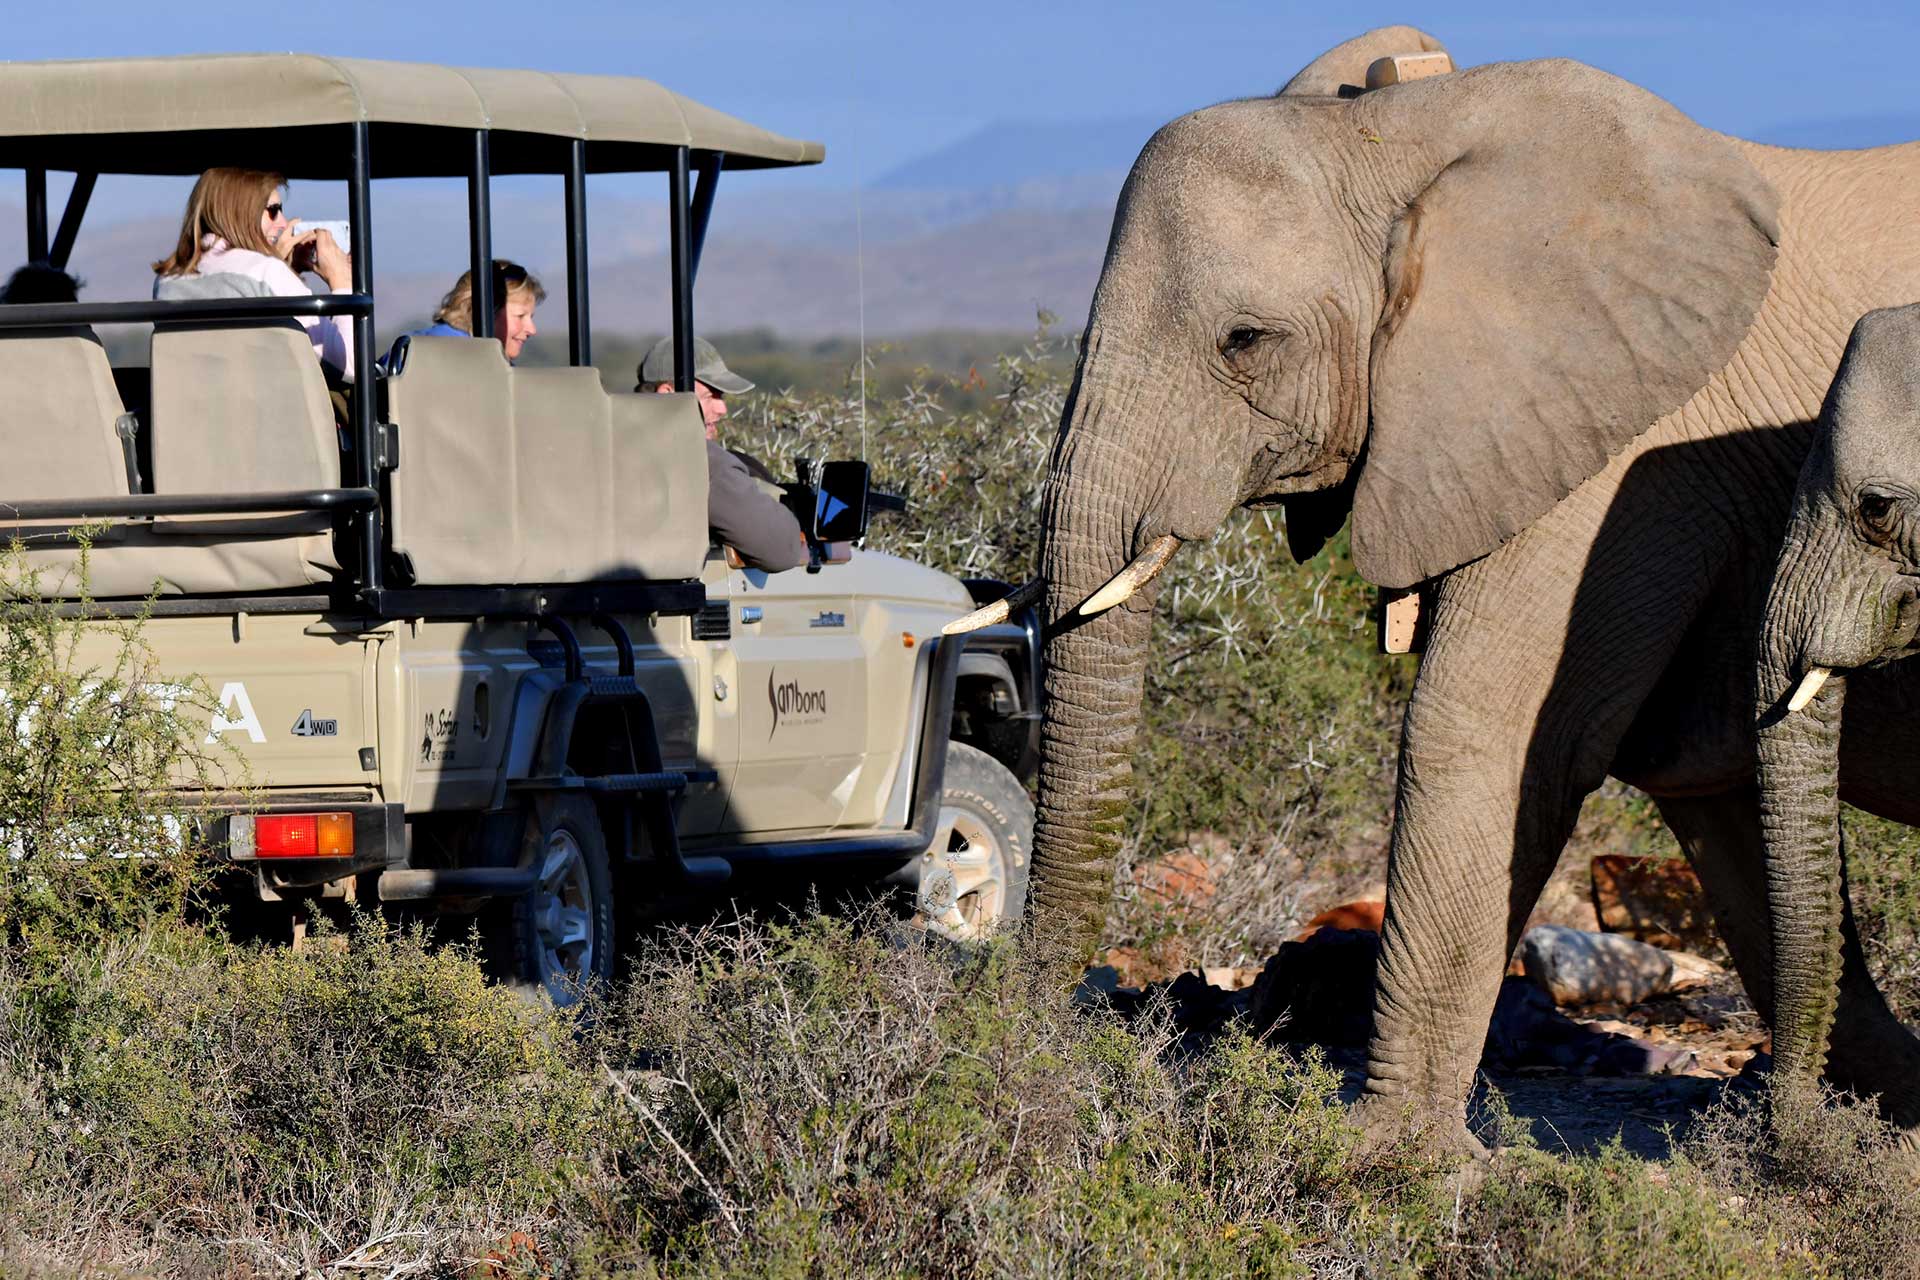 A close encounter with an elephant spotted on a game drive in the Sanbona Wildlife Reserve.